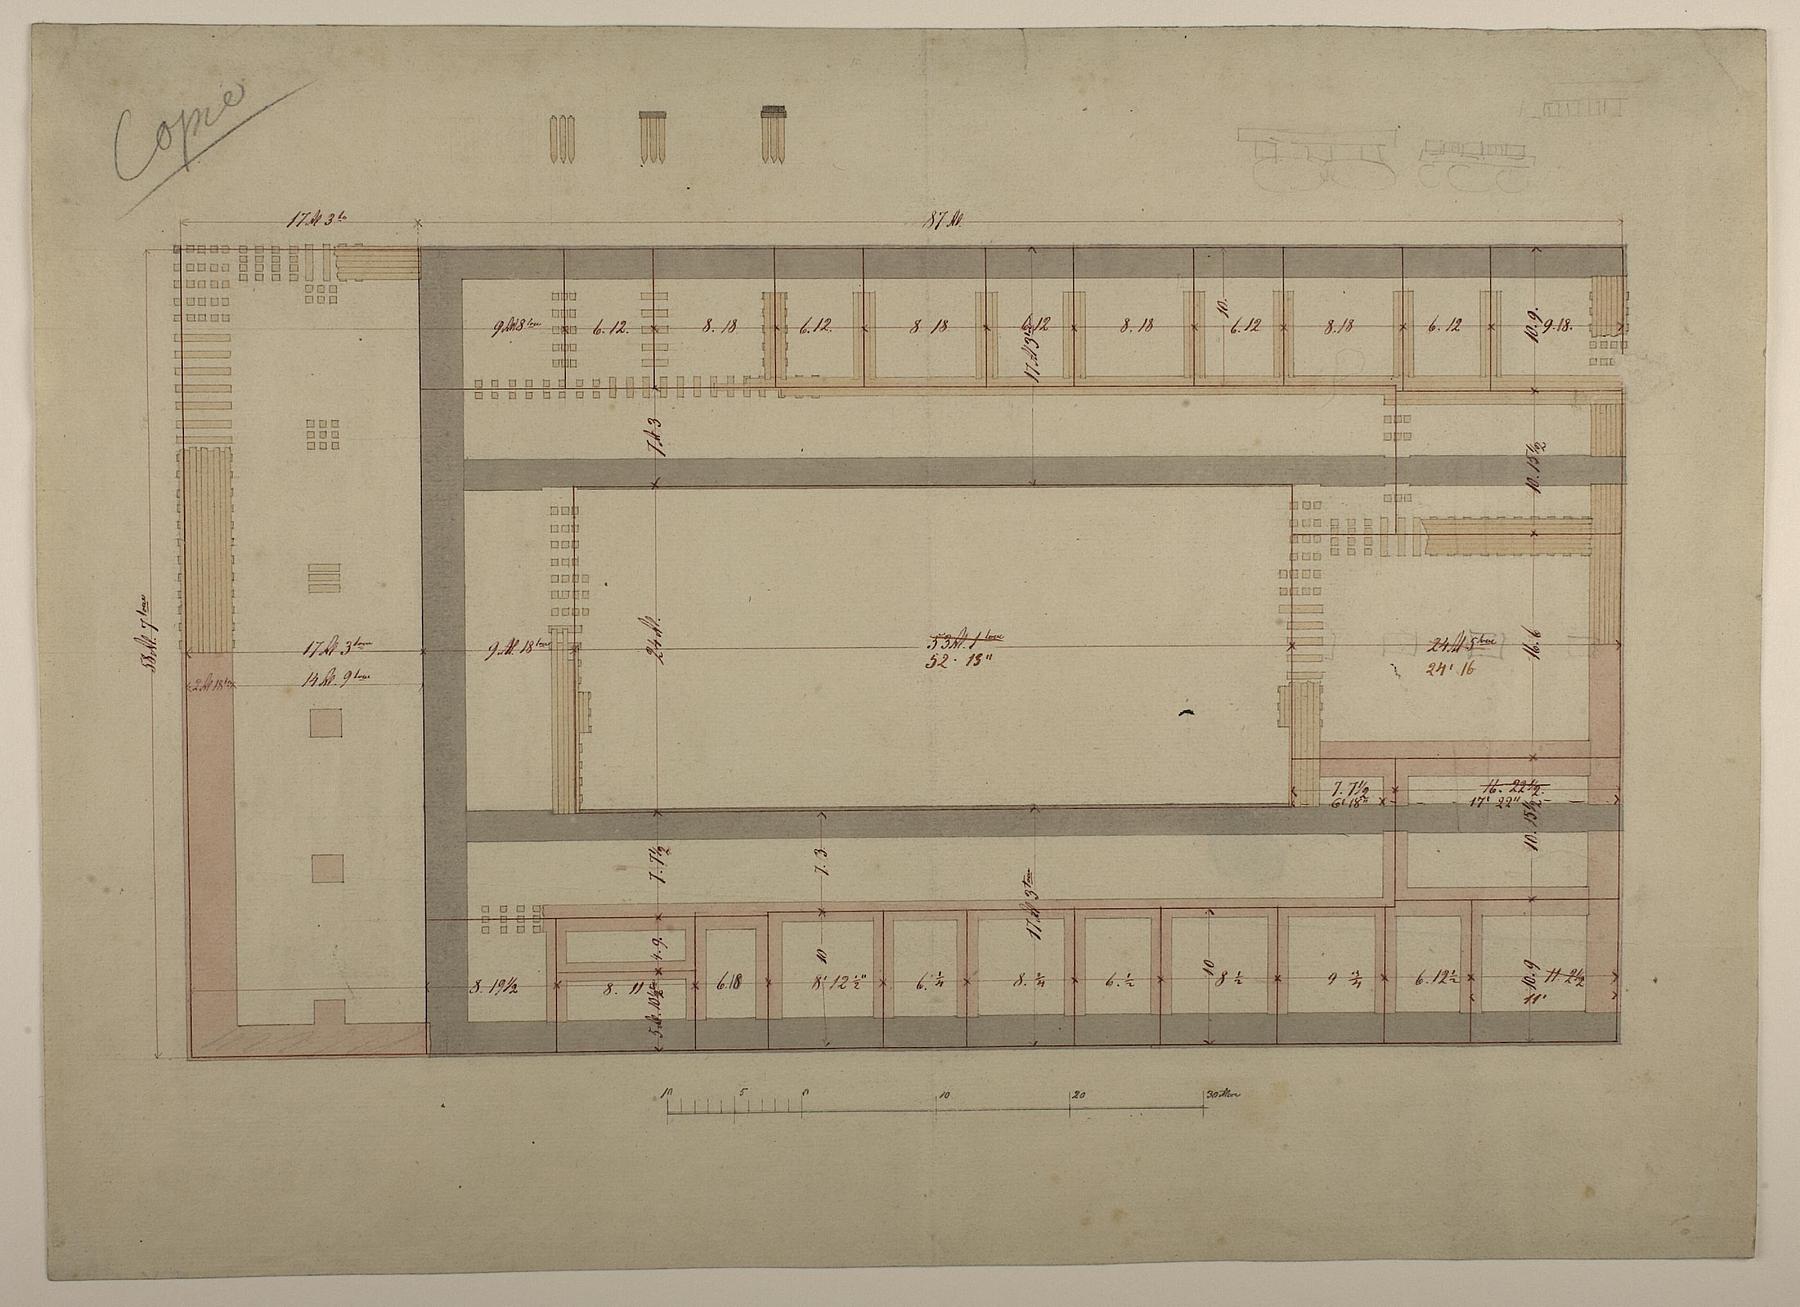 Thorvaldsens Museum, Plan of the Basement with Pile Foundation and the Former Carriage Shed's Foundation, D1753